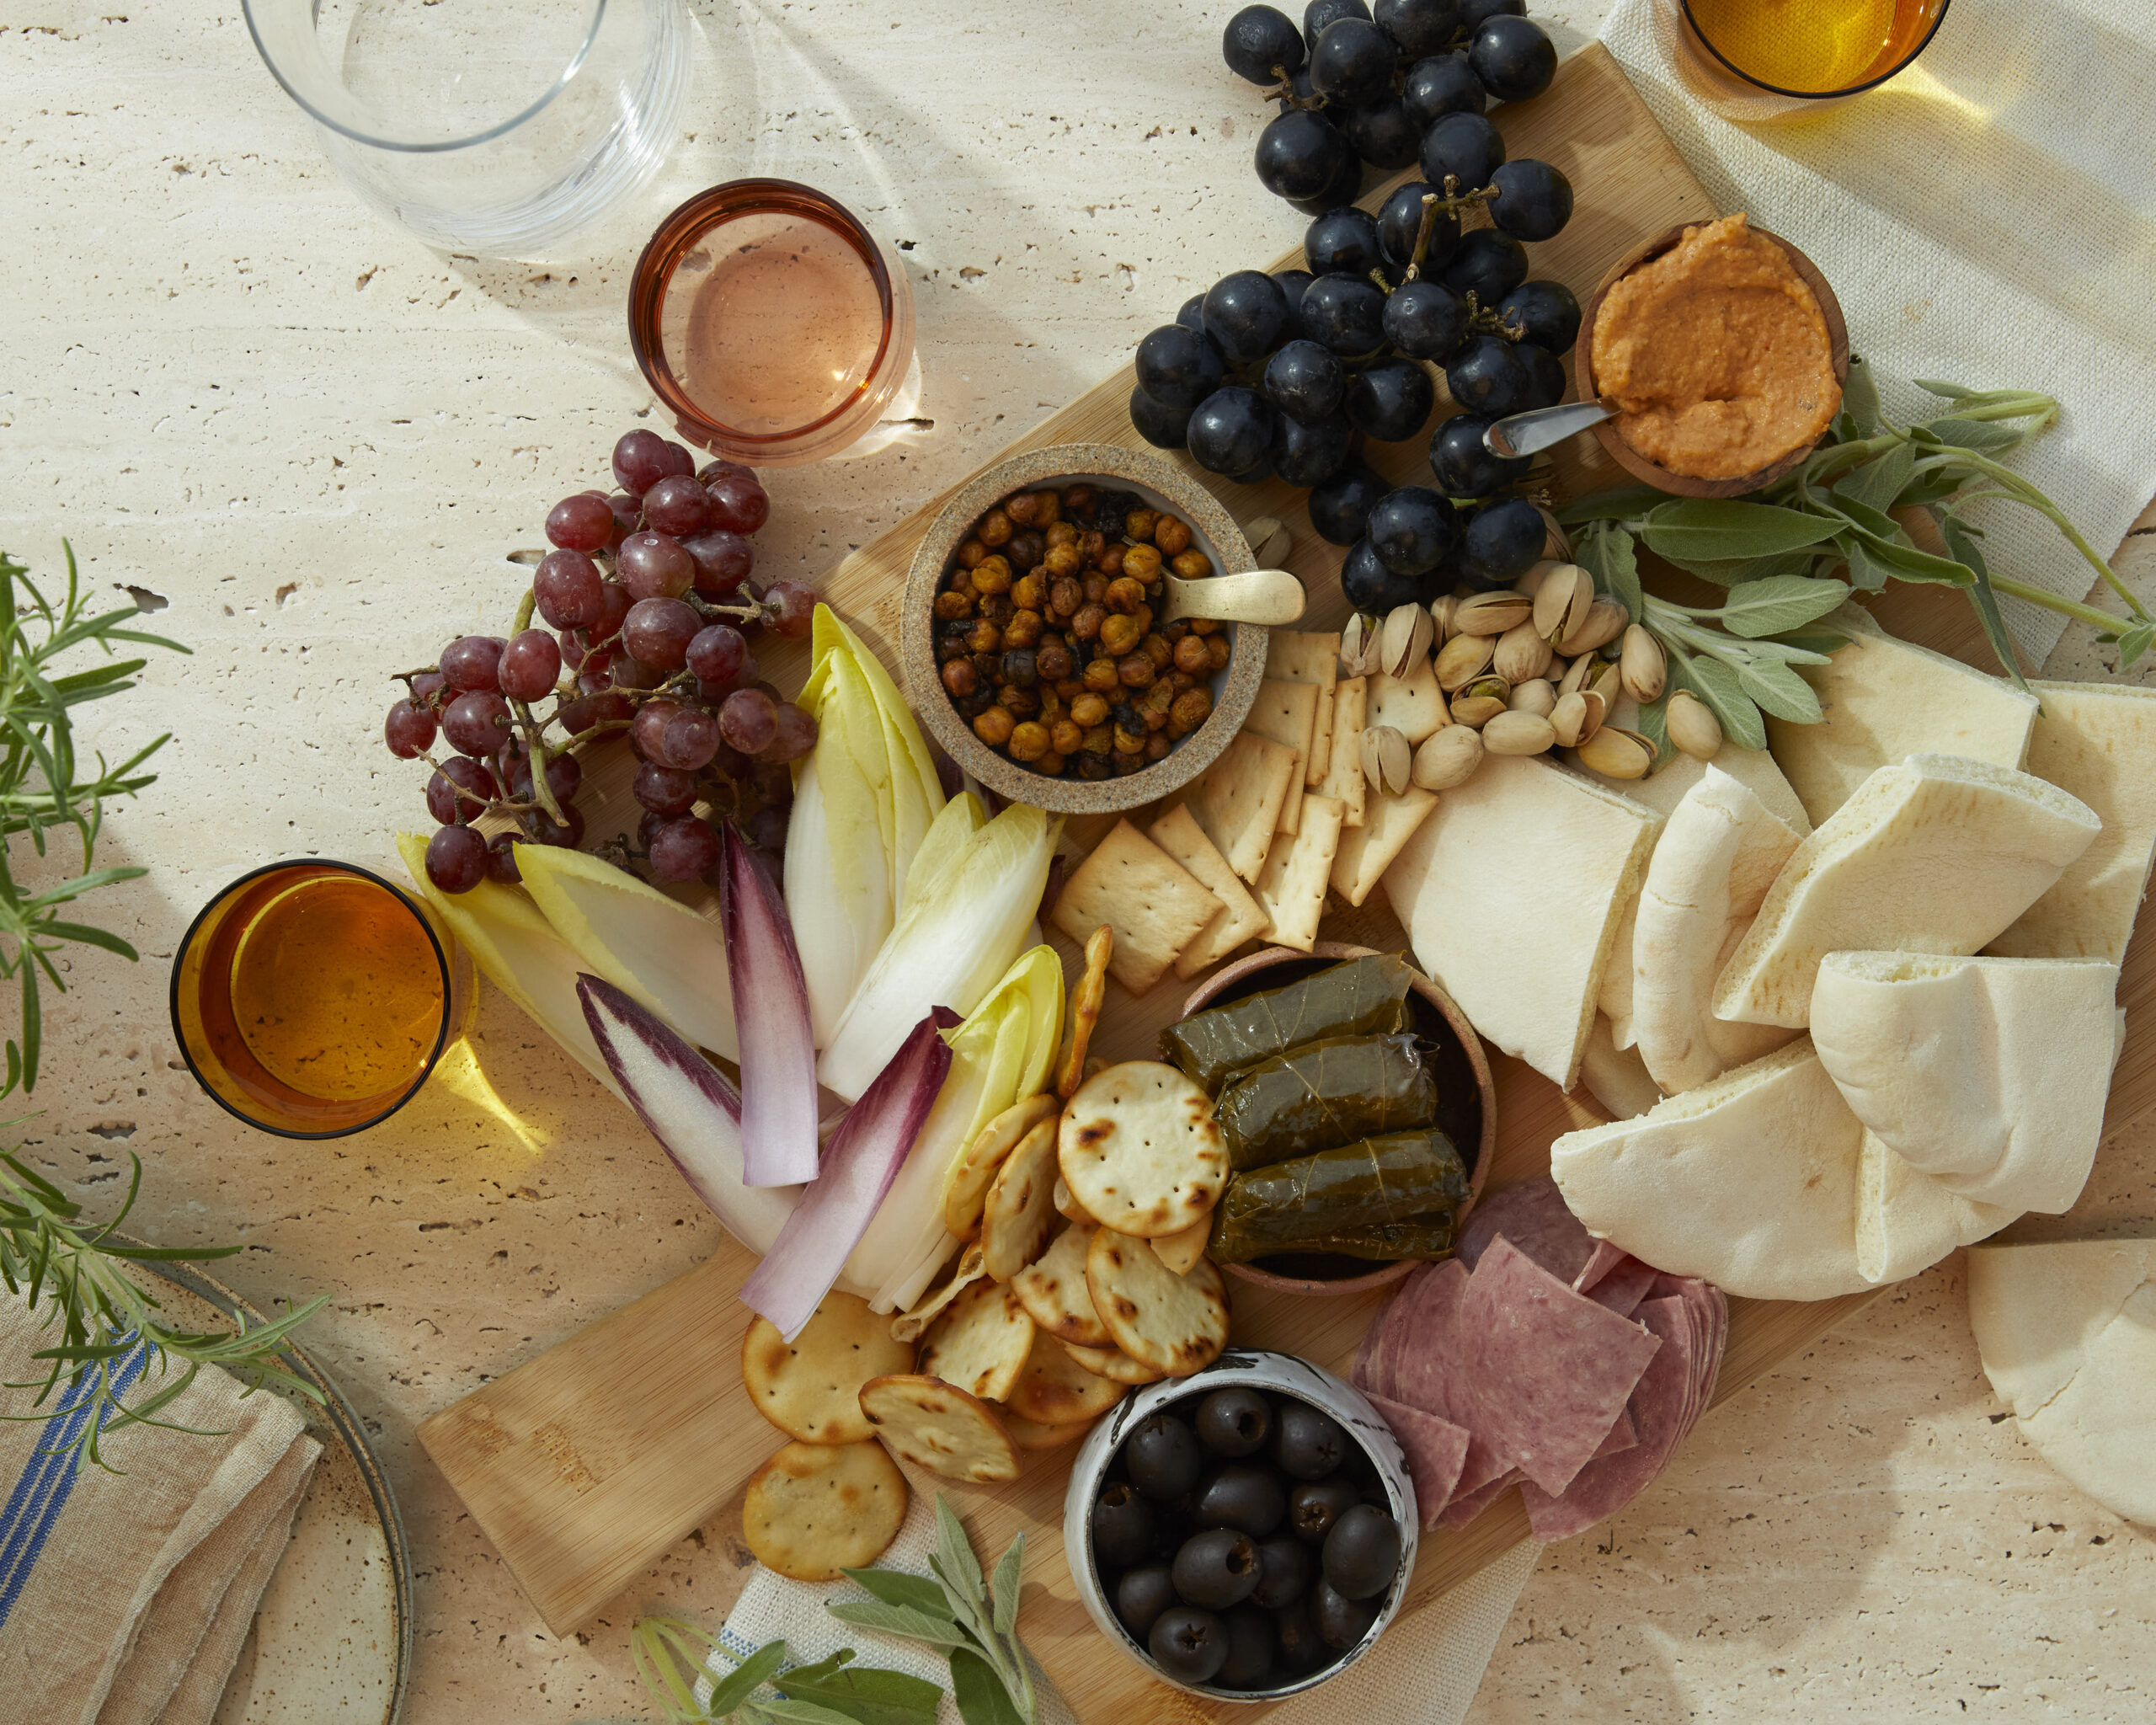 Make a Kosher Charcuterie Board with Vegan Cheese